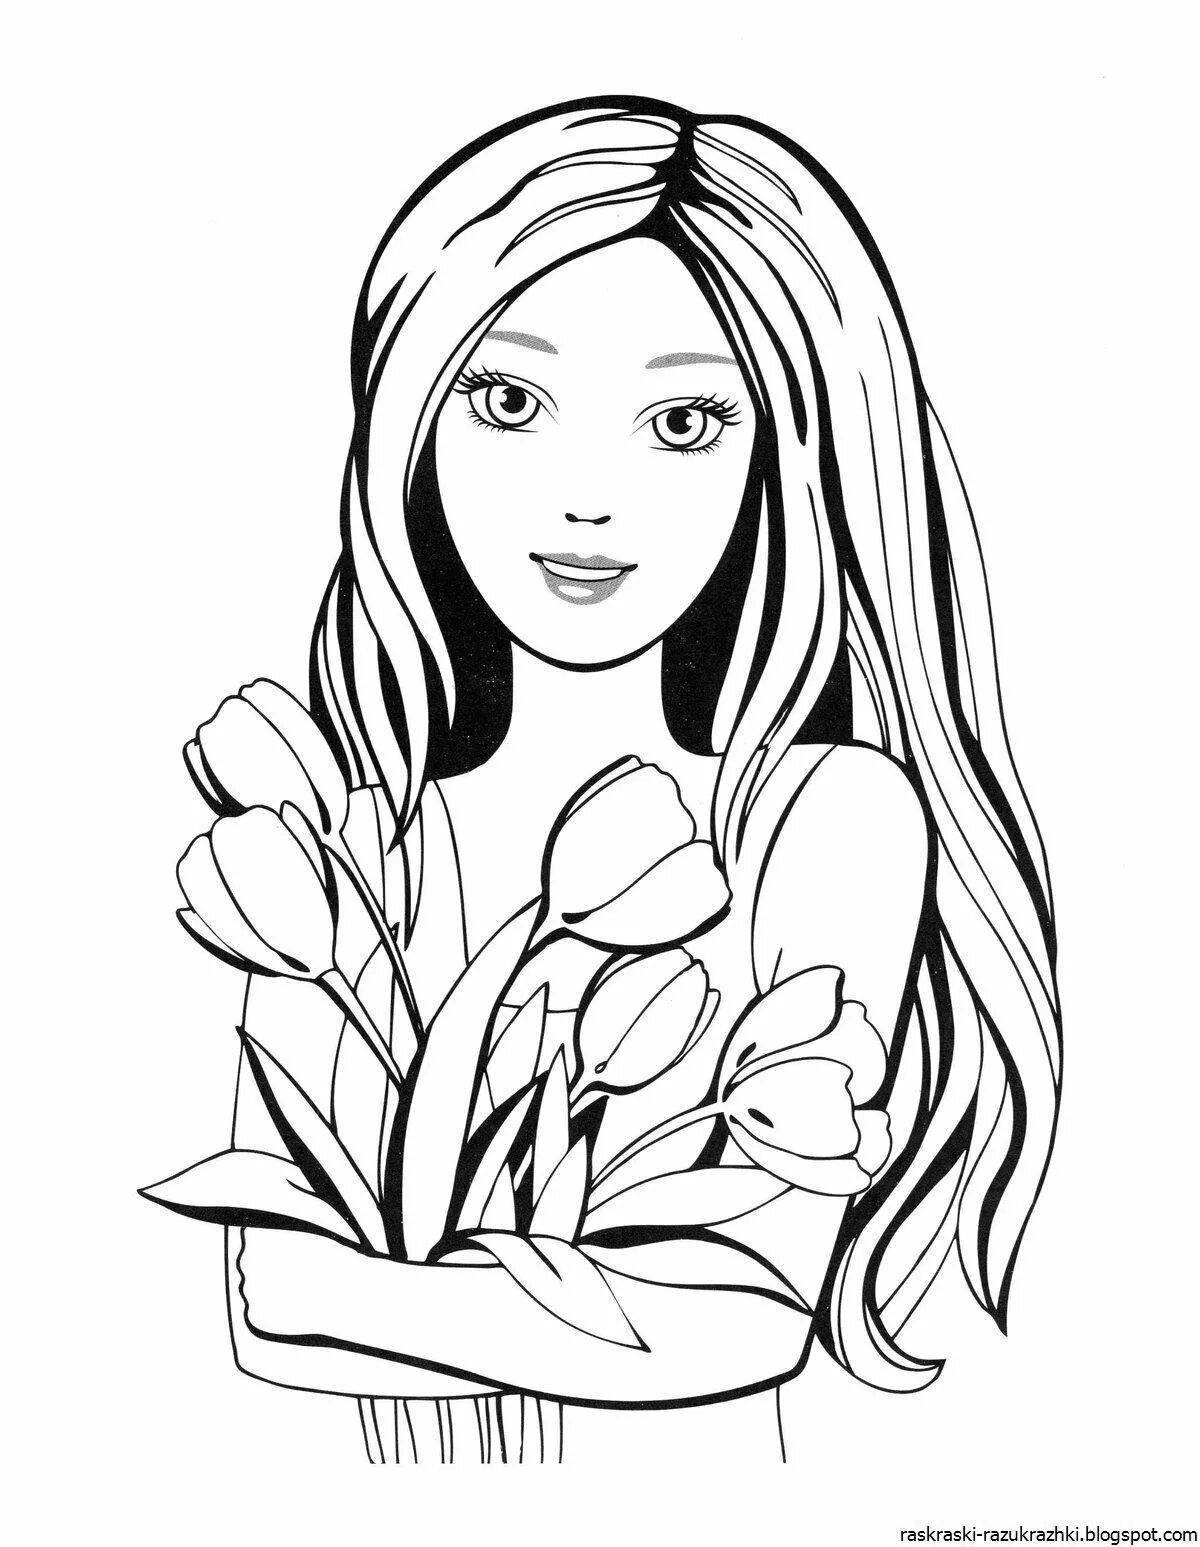 Great coloring book for girls